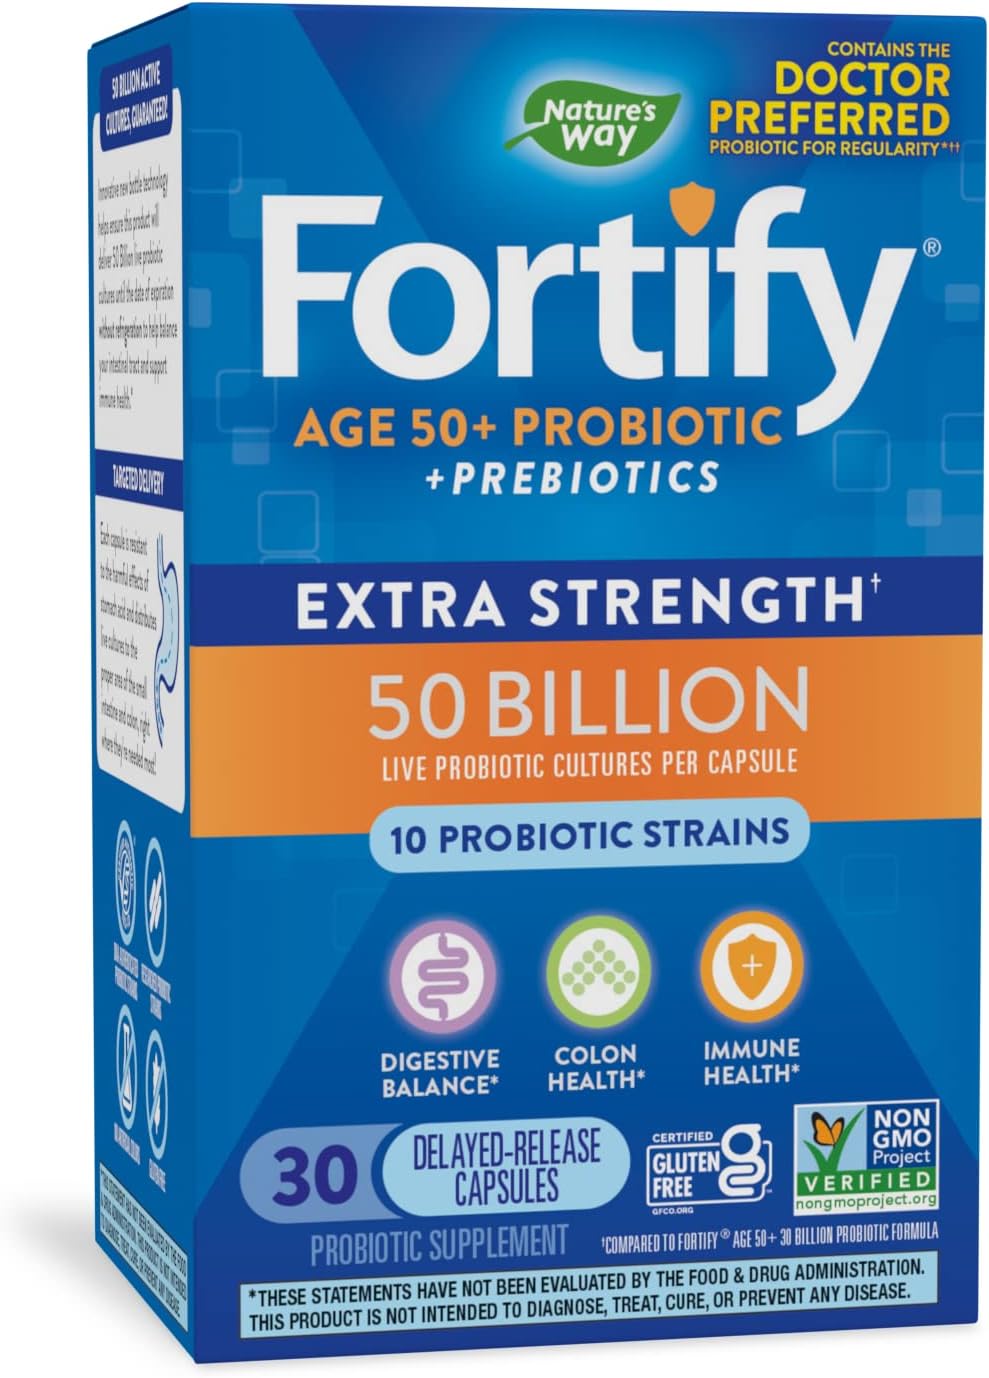 Natures Way Fortify Age 50+ Probiotic + Prebiotic, Colon, Digestive, and Immune Health Support*, 30 